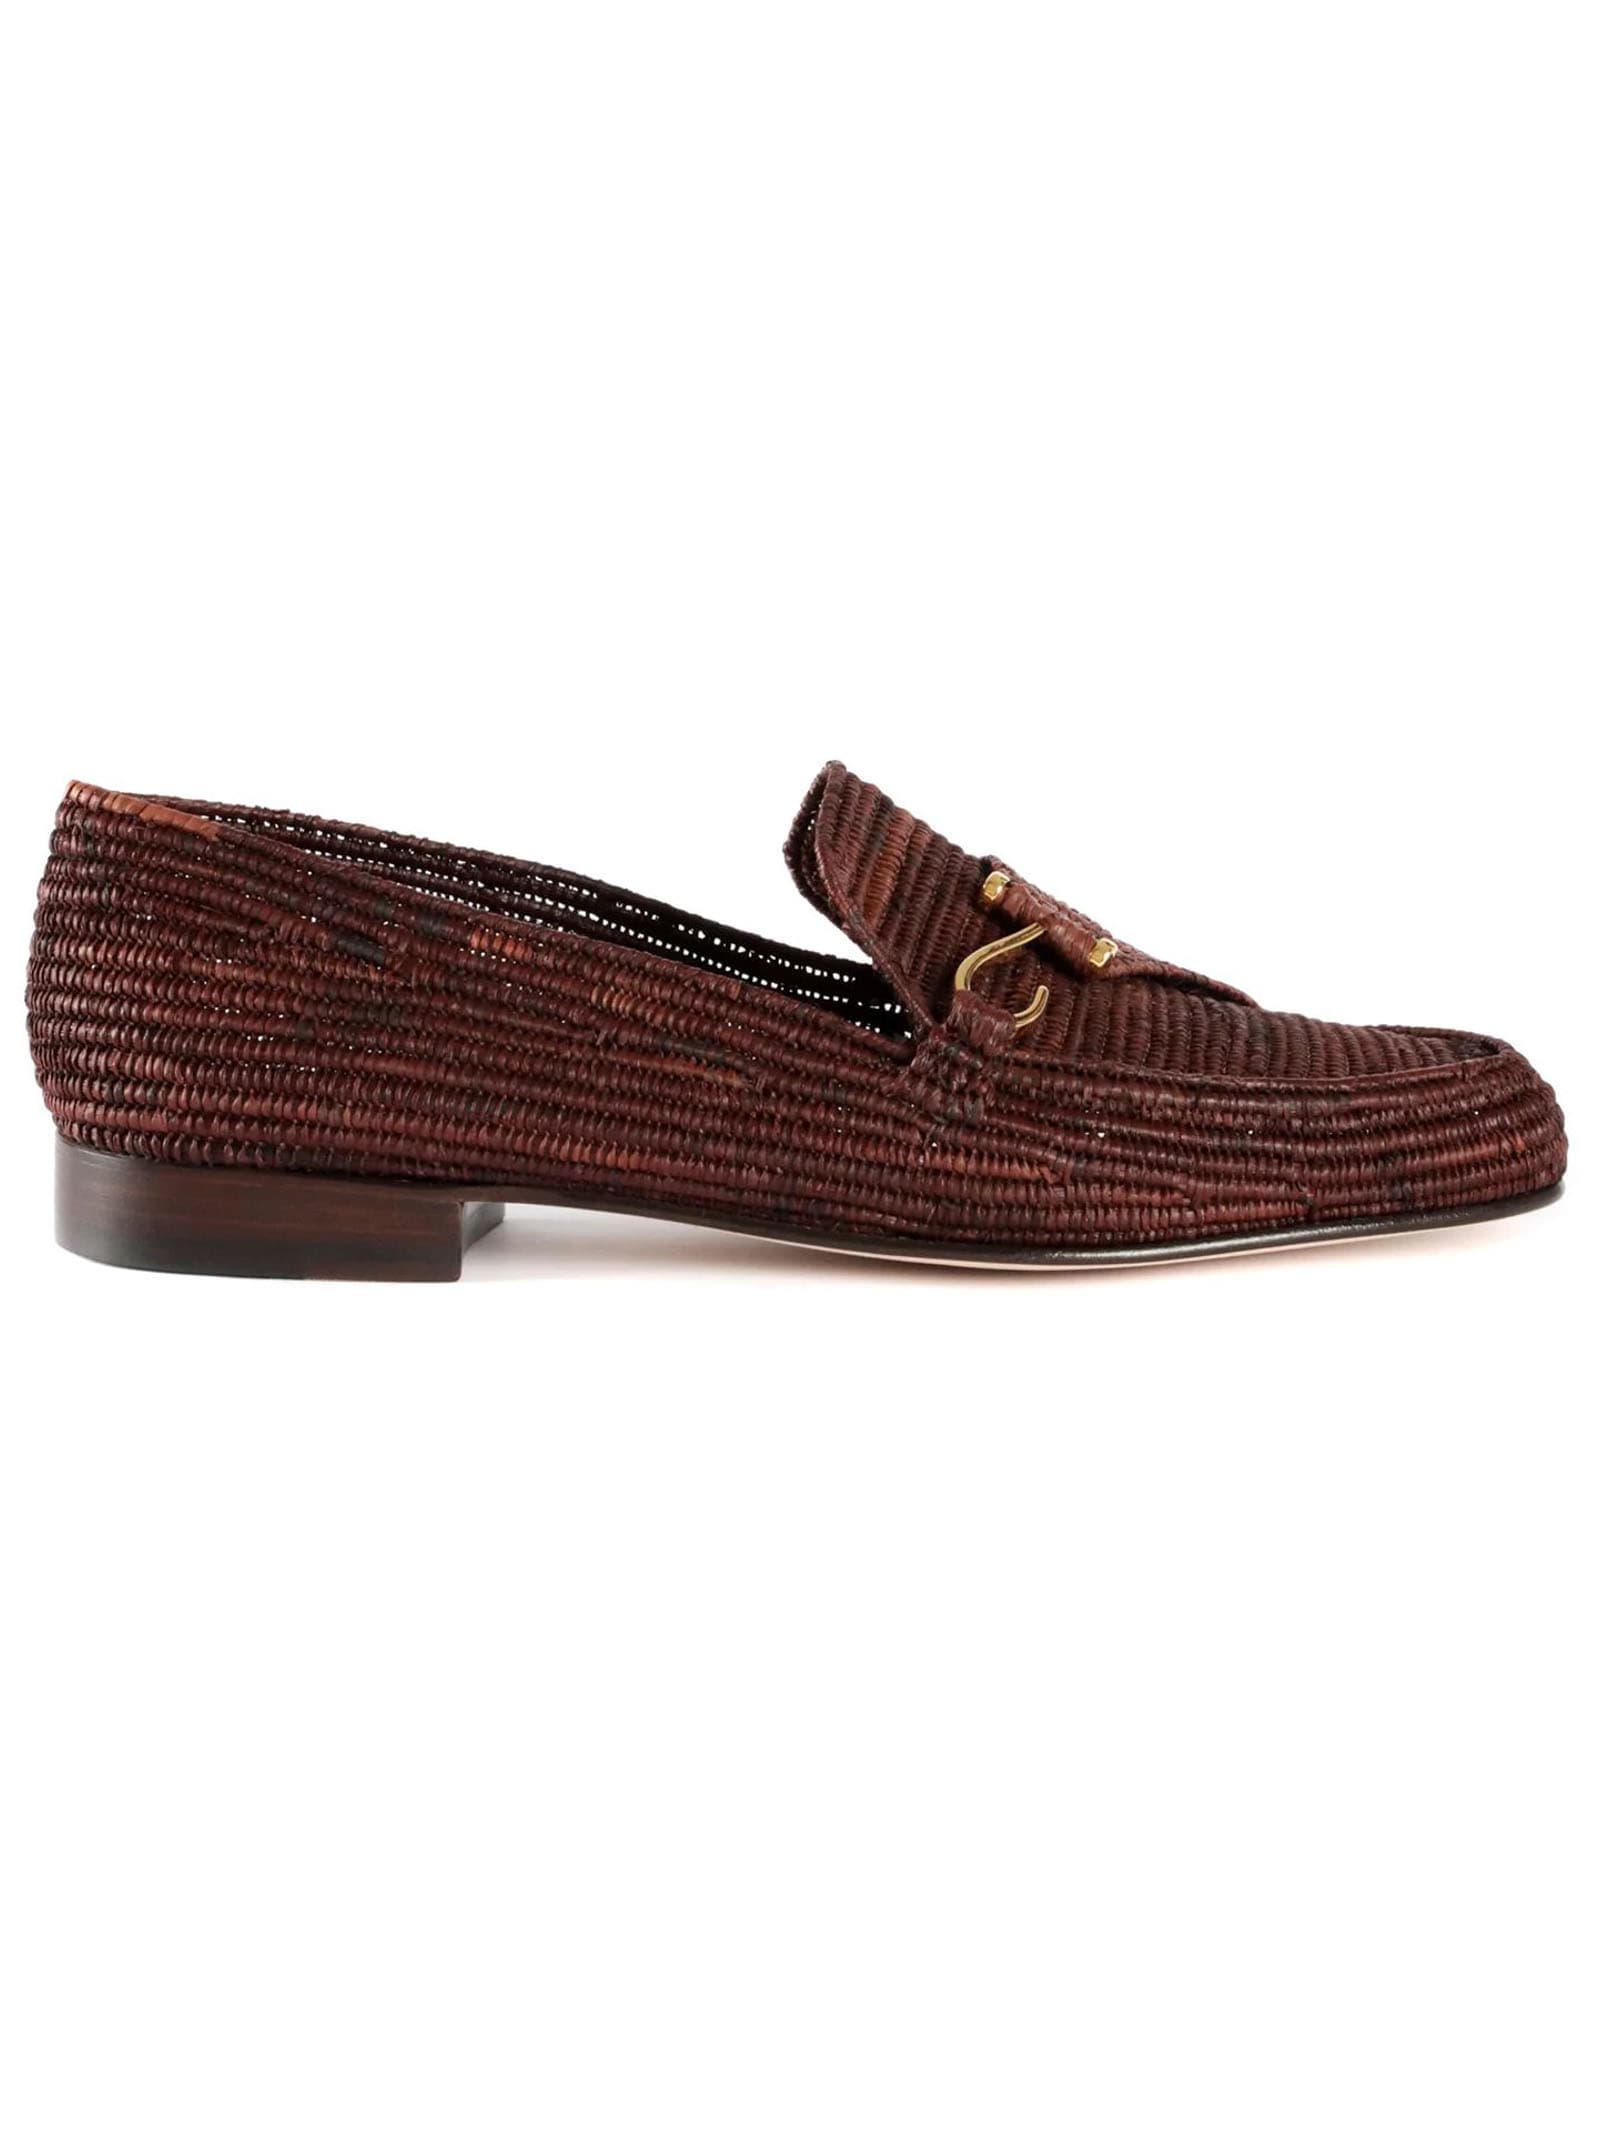 Aghadir Brown Straw Loafer